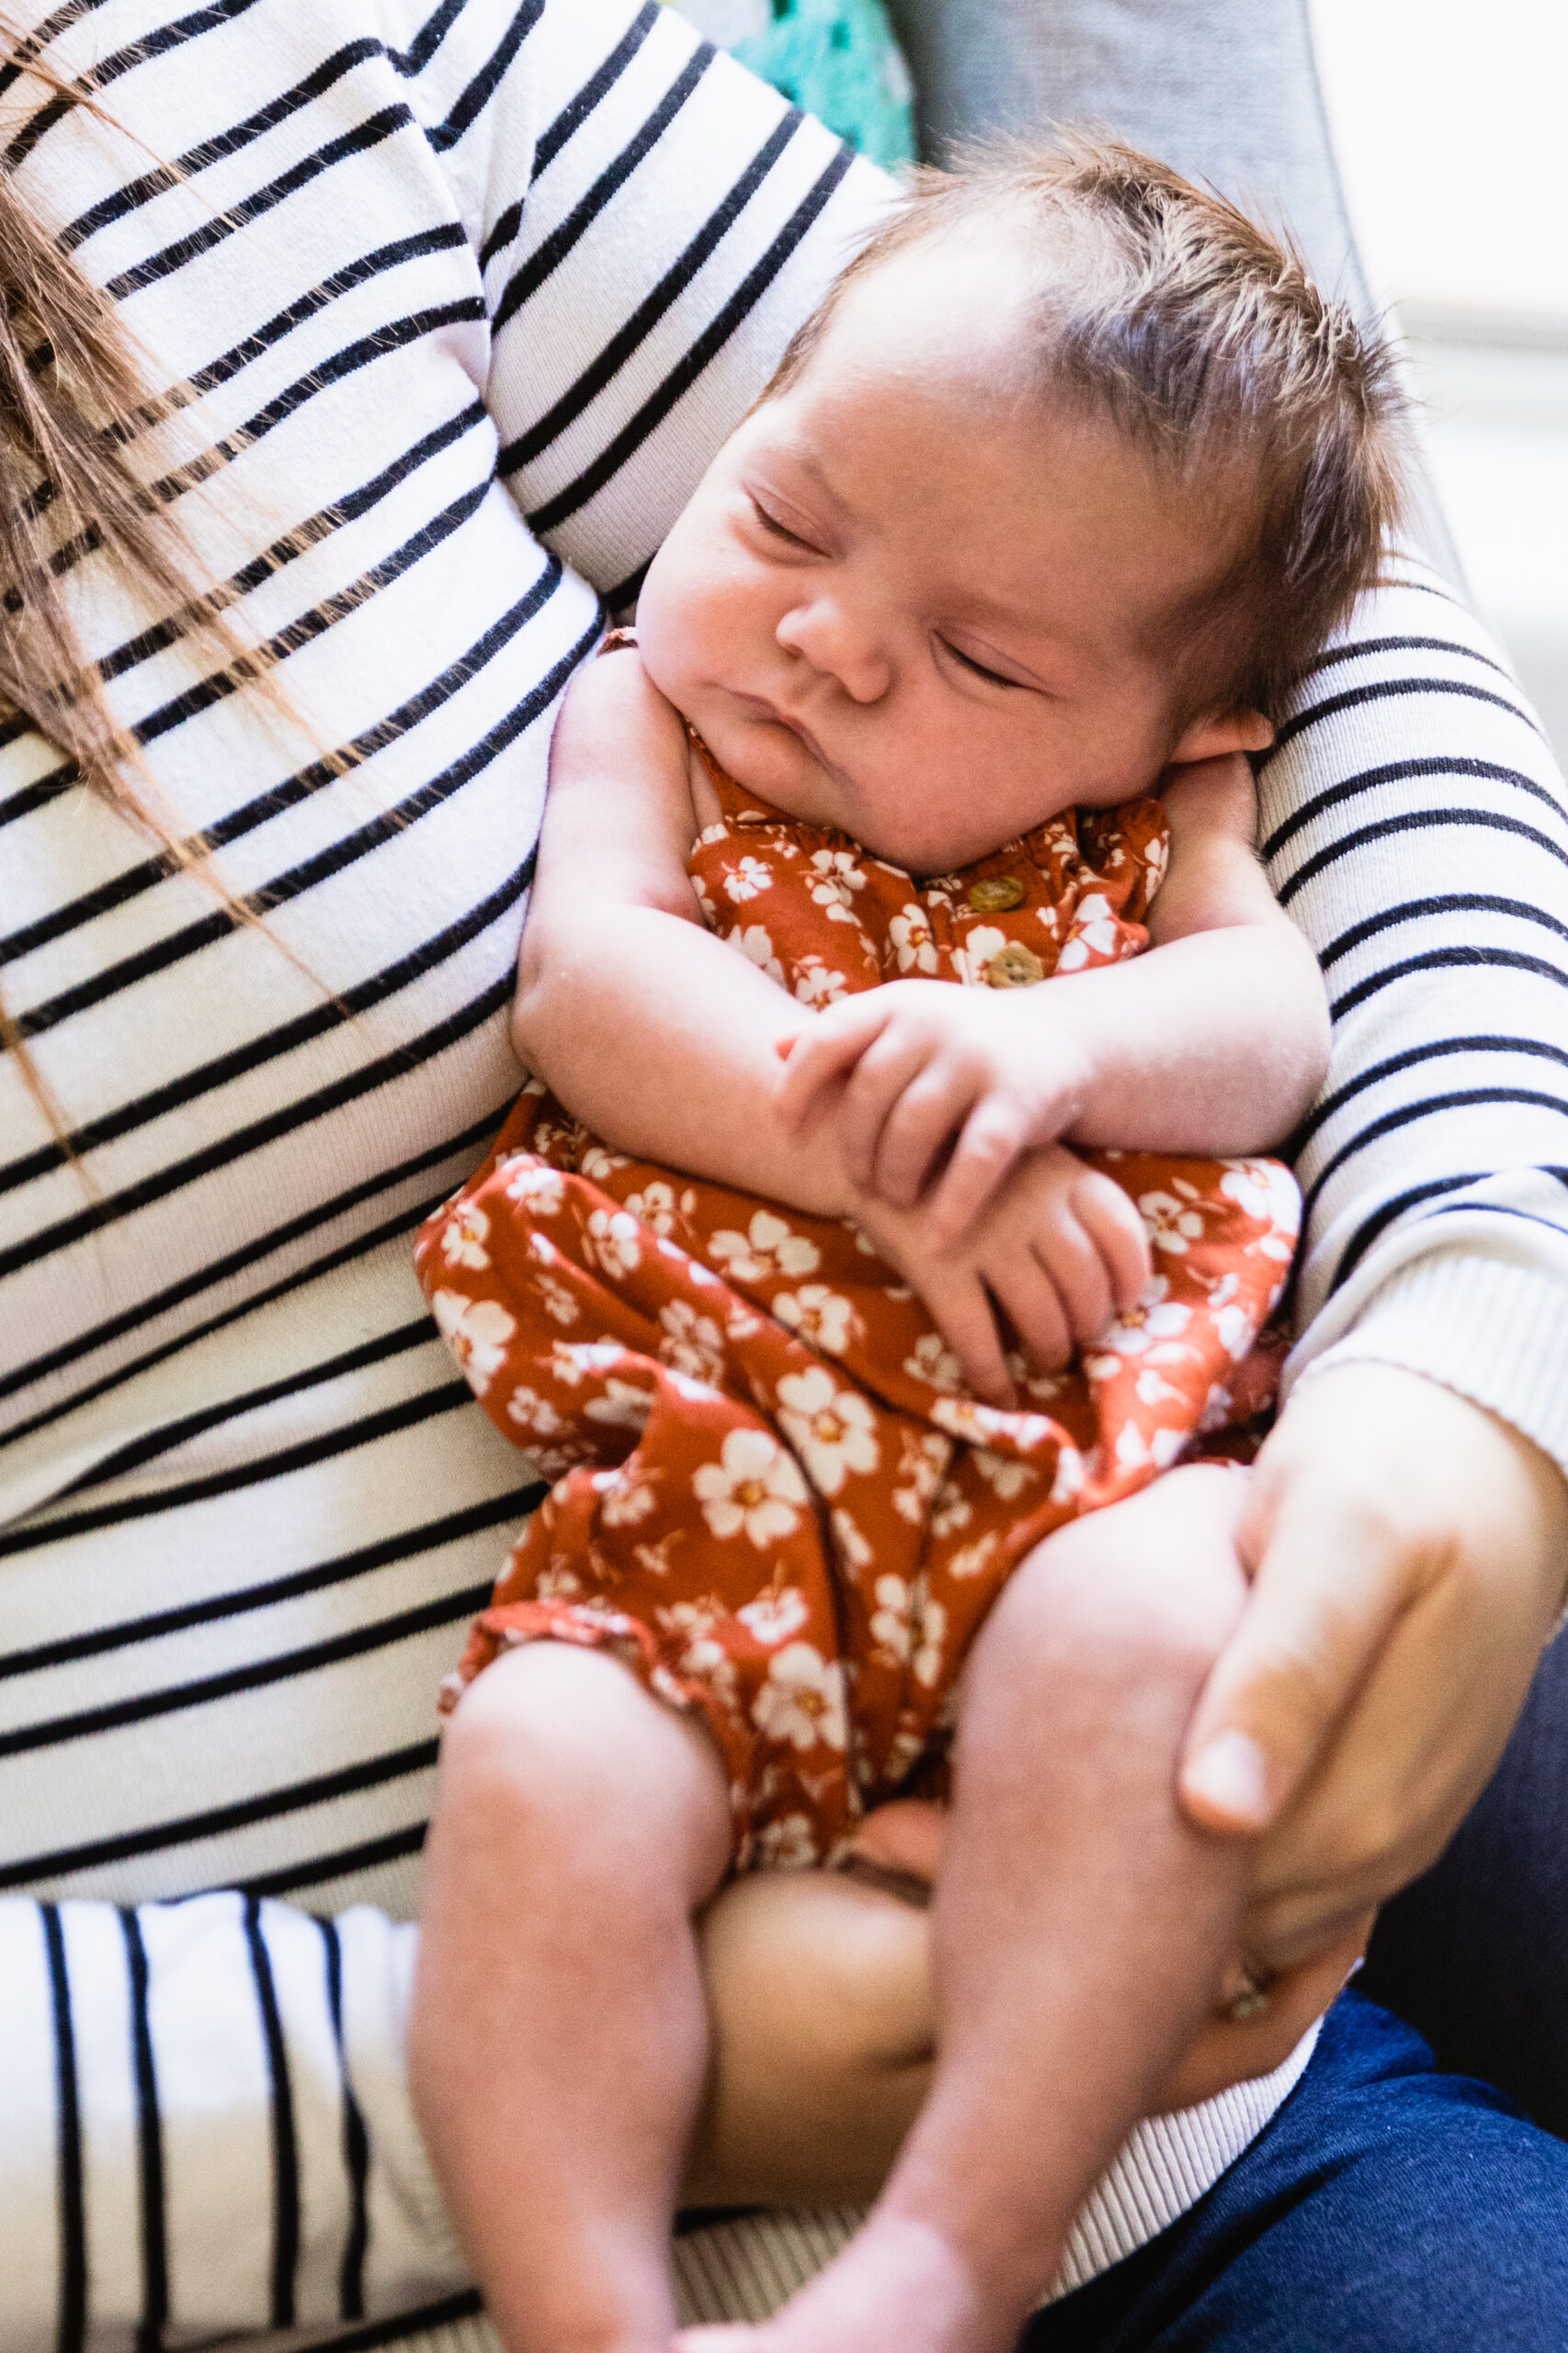 Newborn in her mother's arms during their in-home newborn Phoenix family session by Arizona family photographer Juniper and Co Photography.